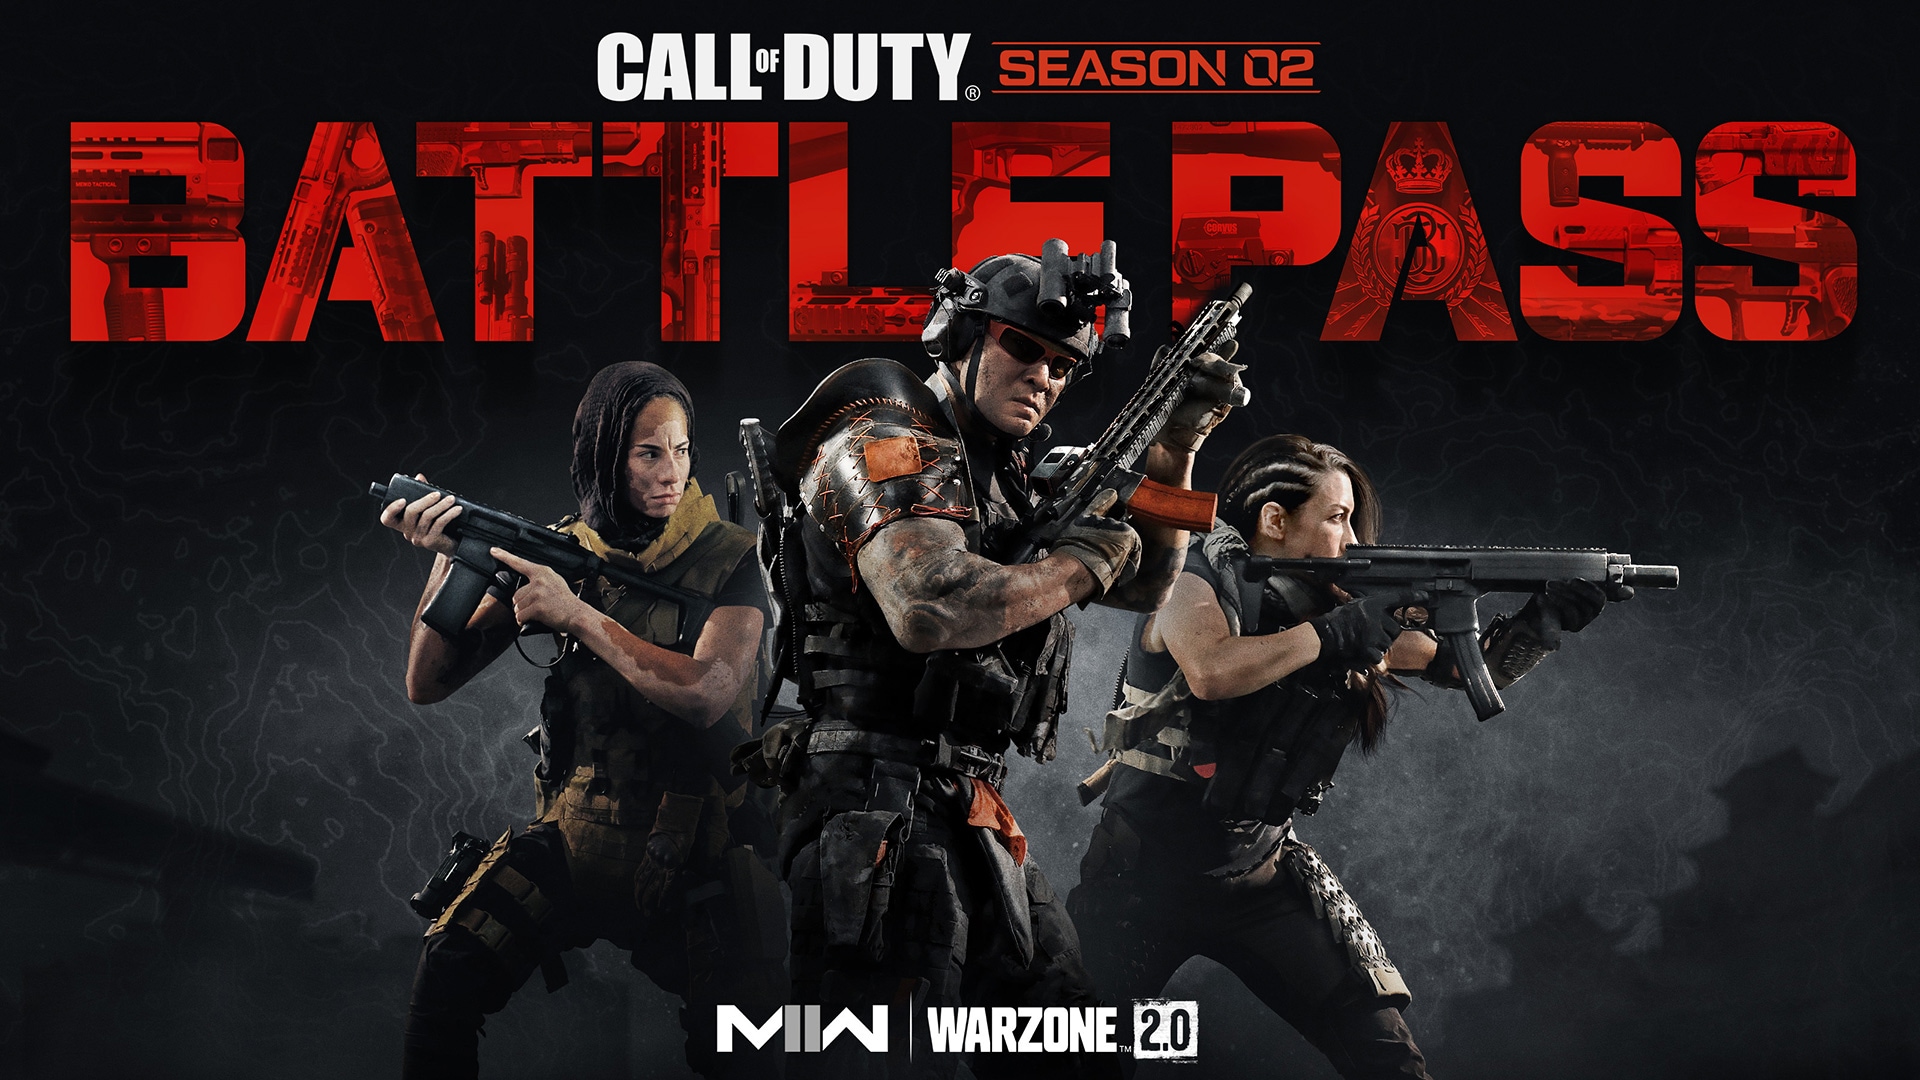 Season 02 Battle Pass and Bundles for Call of Duty: Modern Warfare II and Call of Duty: Warzone 2.0